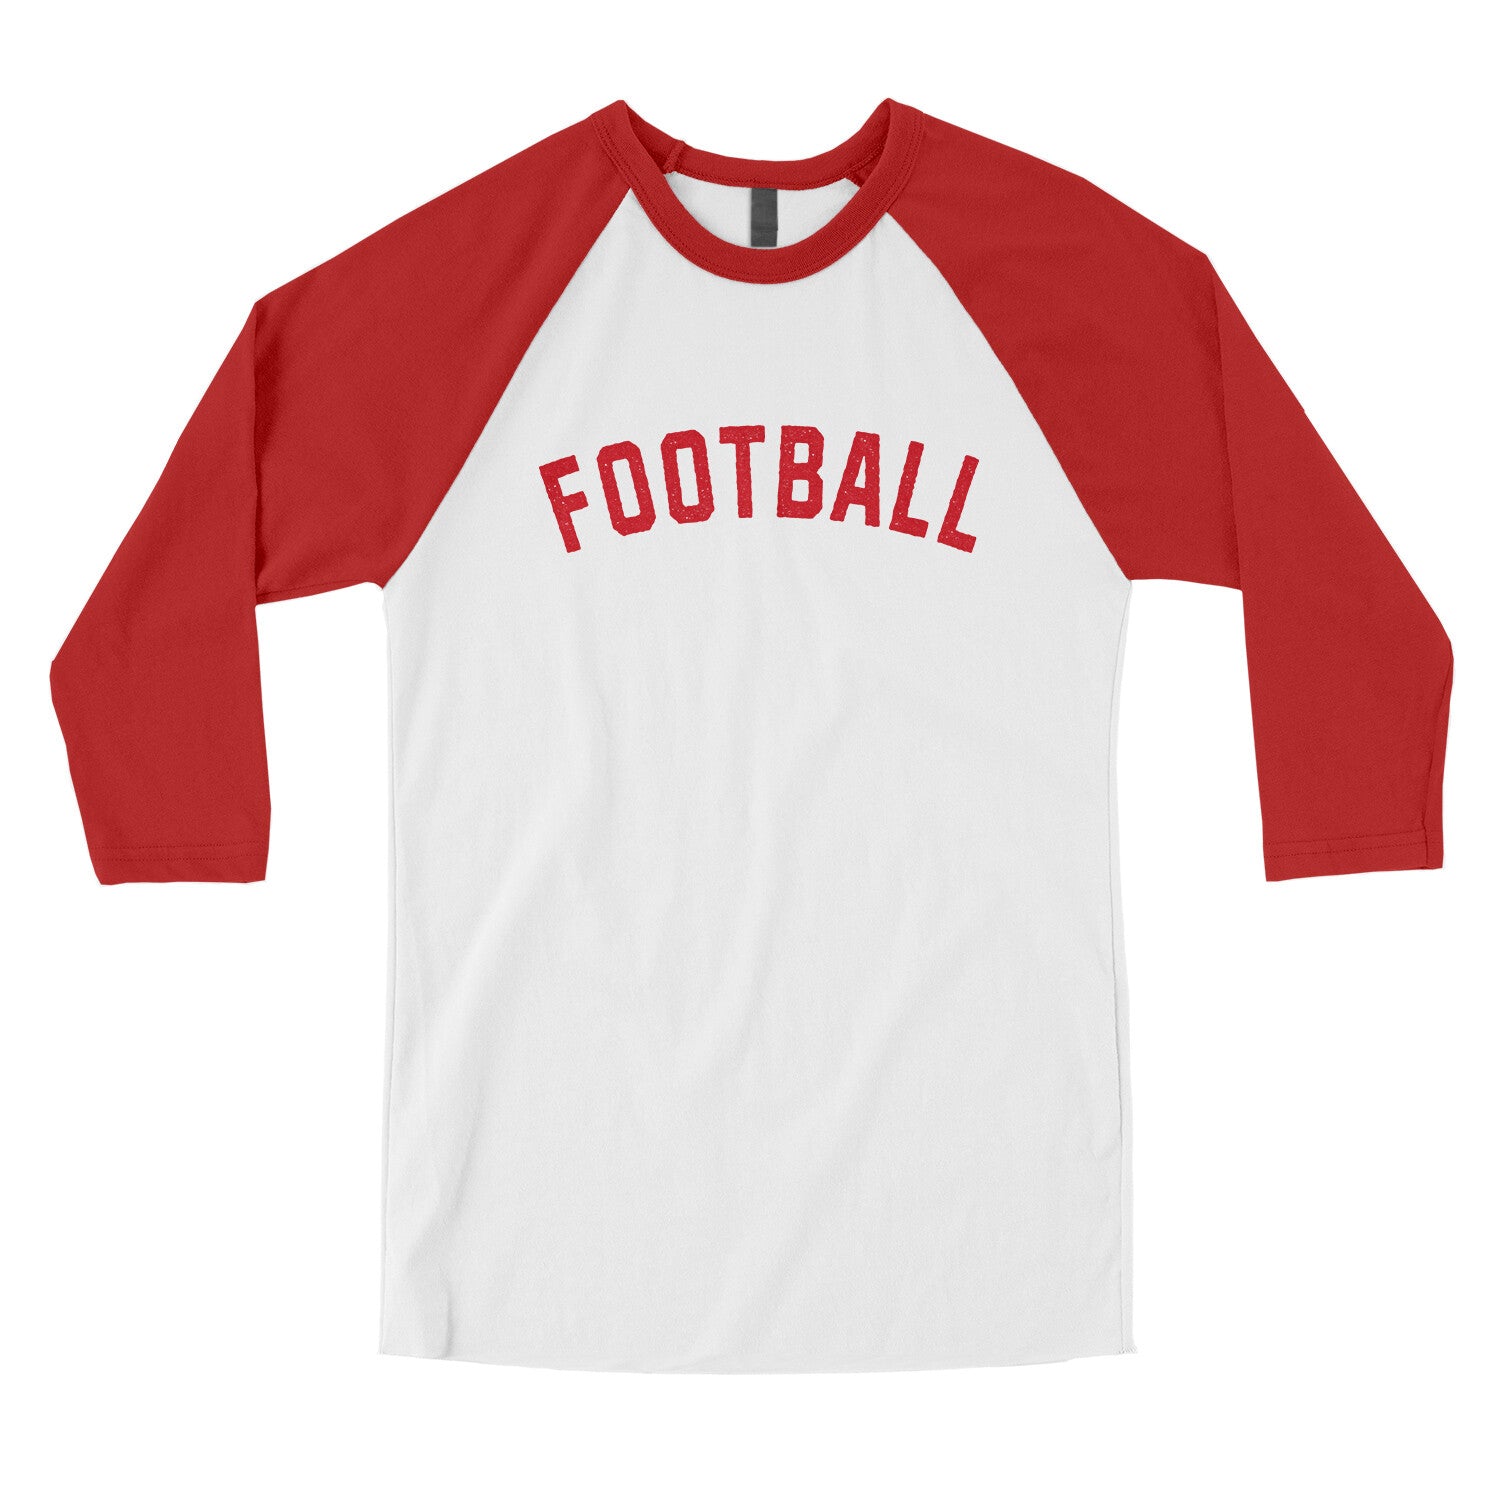 Football in White with Red Color